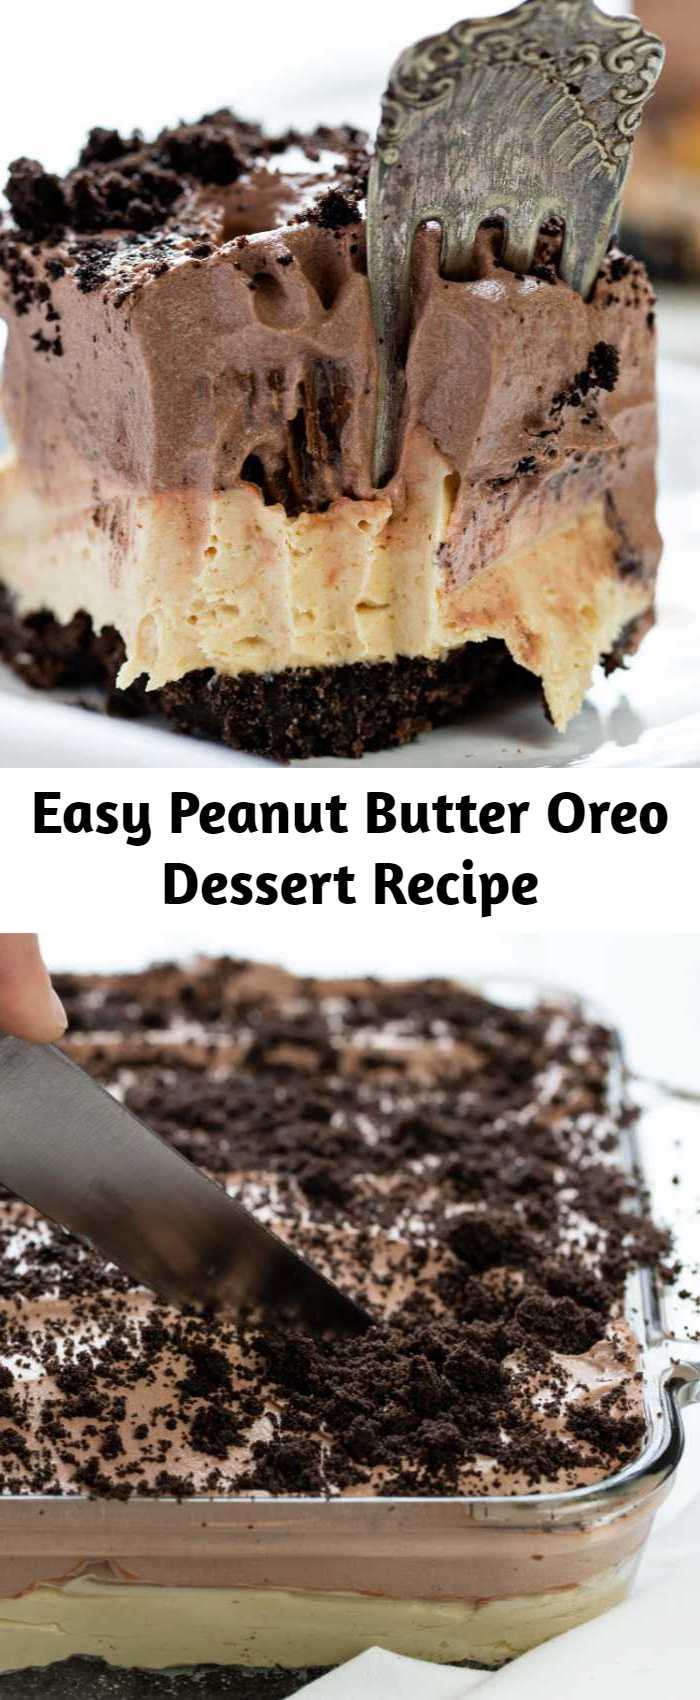 Easy Peanut Butter Oreo Dessert Recipe - When it comes to peanut butter desserts, this Peanut Butter Oreo Dessert will top them all.  This delectable treat has layers of velvety peanut butter filling, peanut butter filled chocolate candy, and a rich hot fudge mousse piled on top of an Oreo cookie crust.